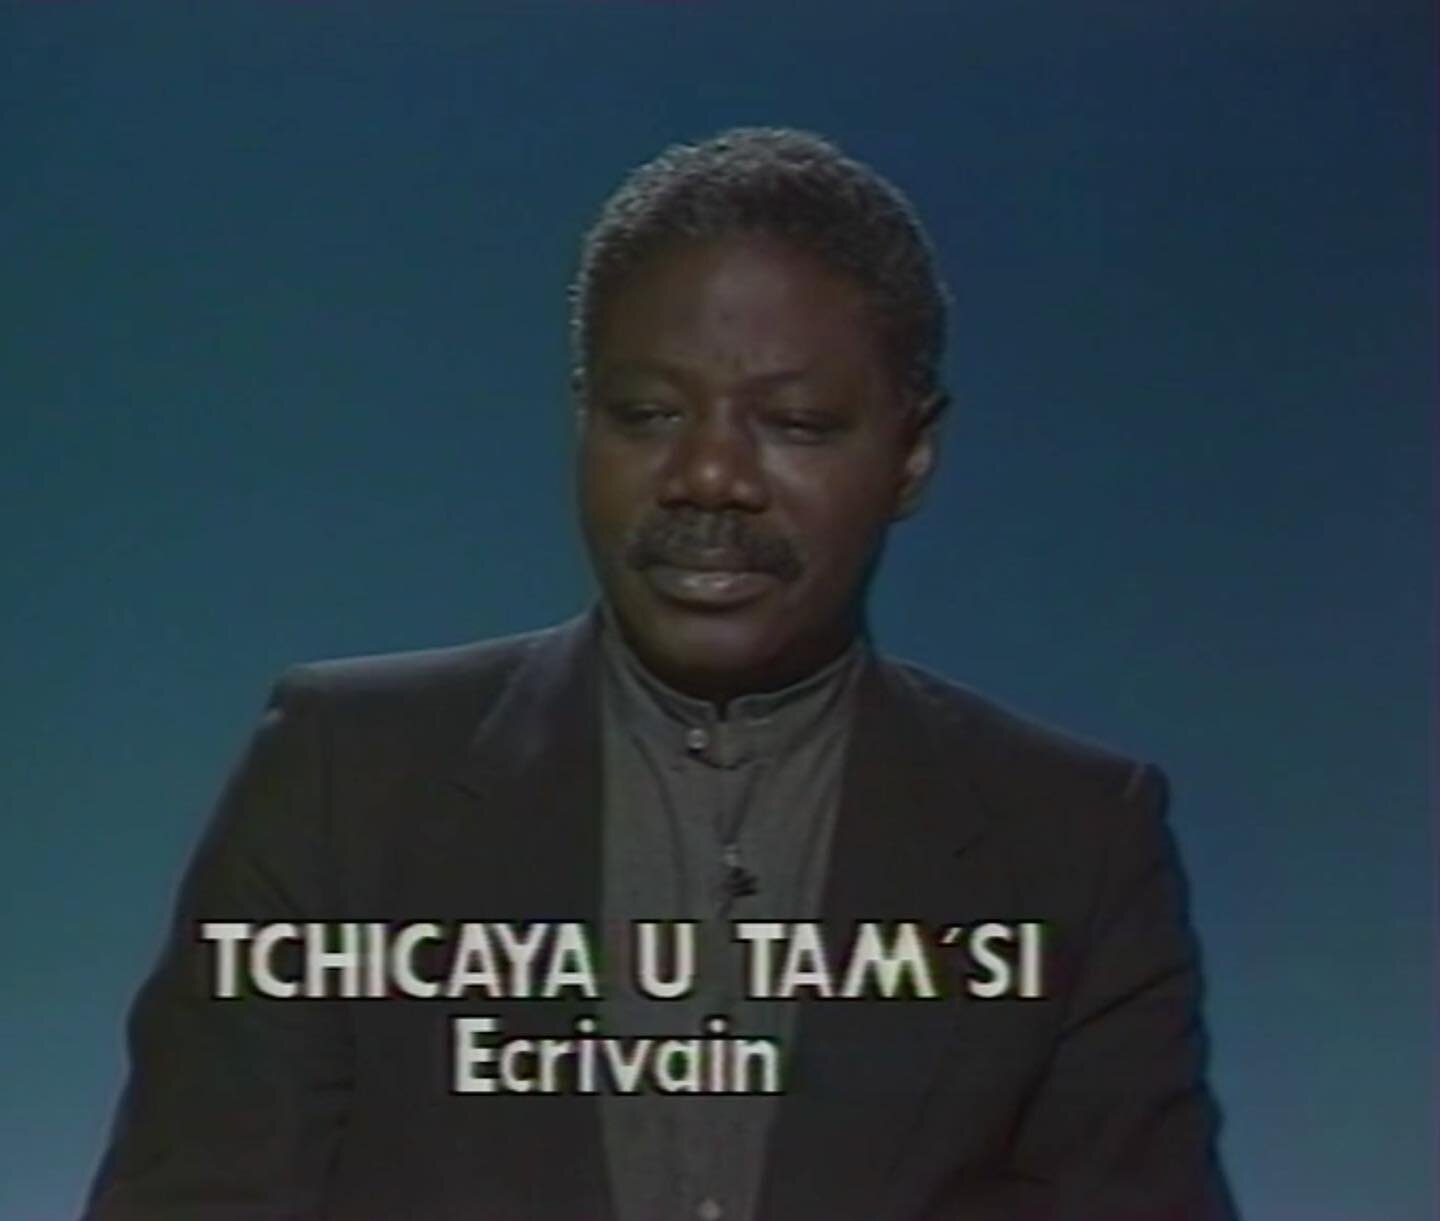 Image of Congolese novelist, playwright and poet, Tchicaya U Tam&rsquo;si, during an interview with Jean Claude Courdy in 1986. U Tam&rsquo;si was born G&eacute;rald-F&eacute;lix Tchicaya in 1931 in present-day Congo-Brazzaville (The Republic of Cong